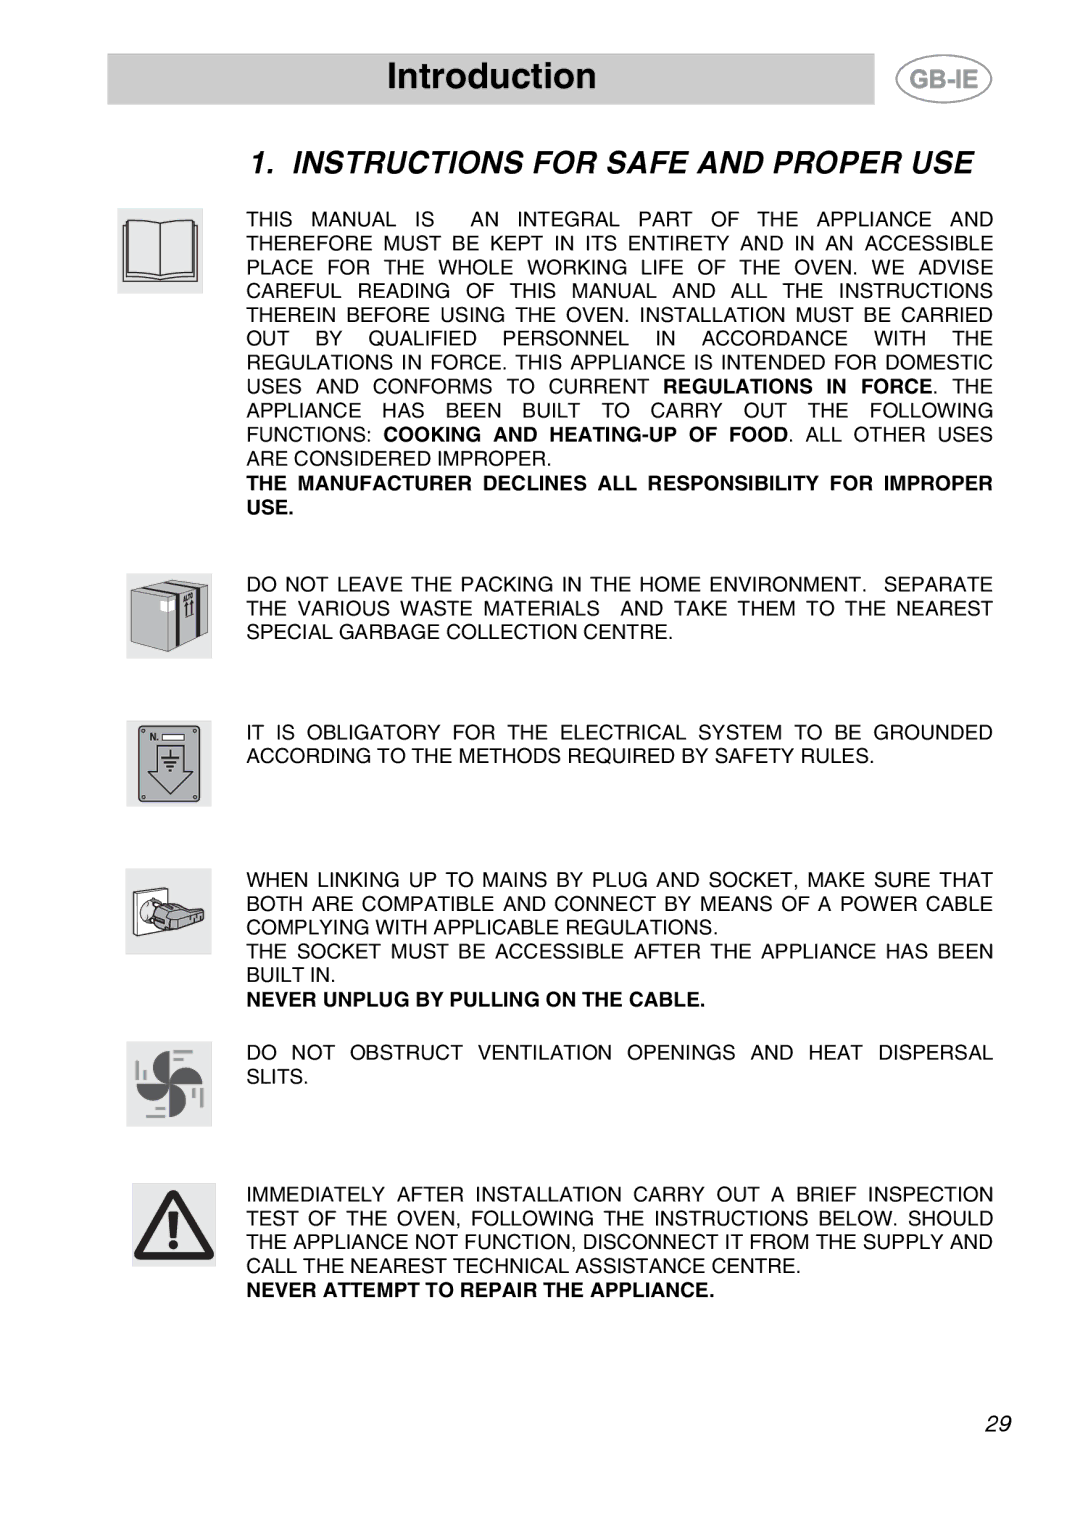 Smeg SC170 manual Introduction, Instructions for Safe and Proper USE 